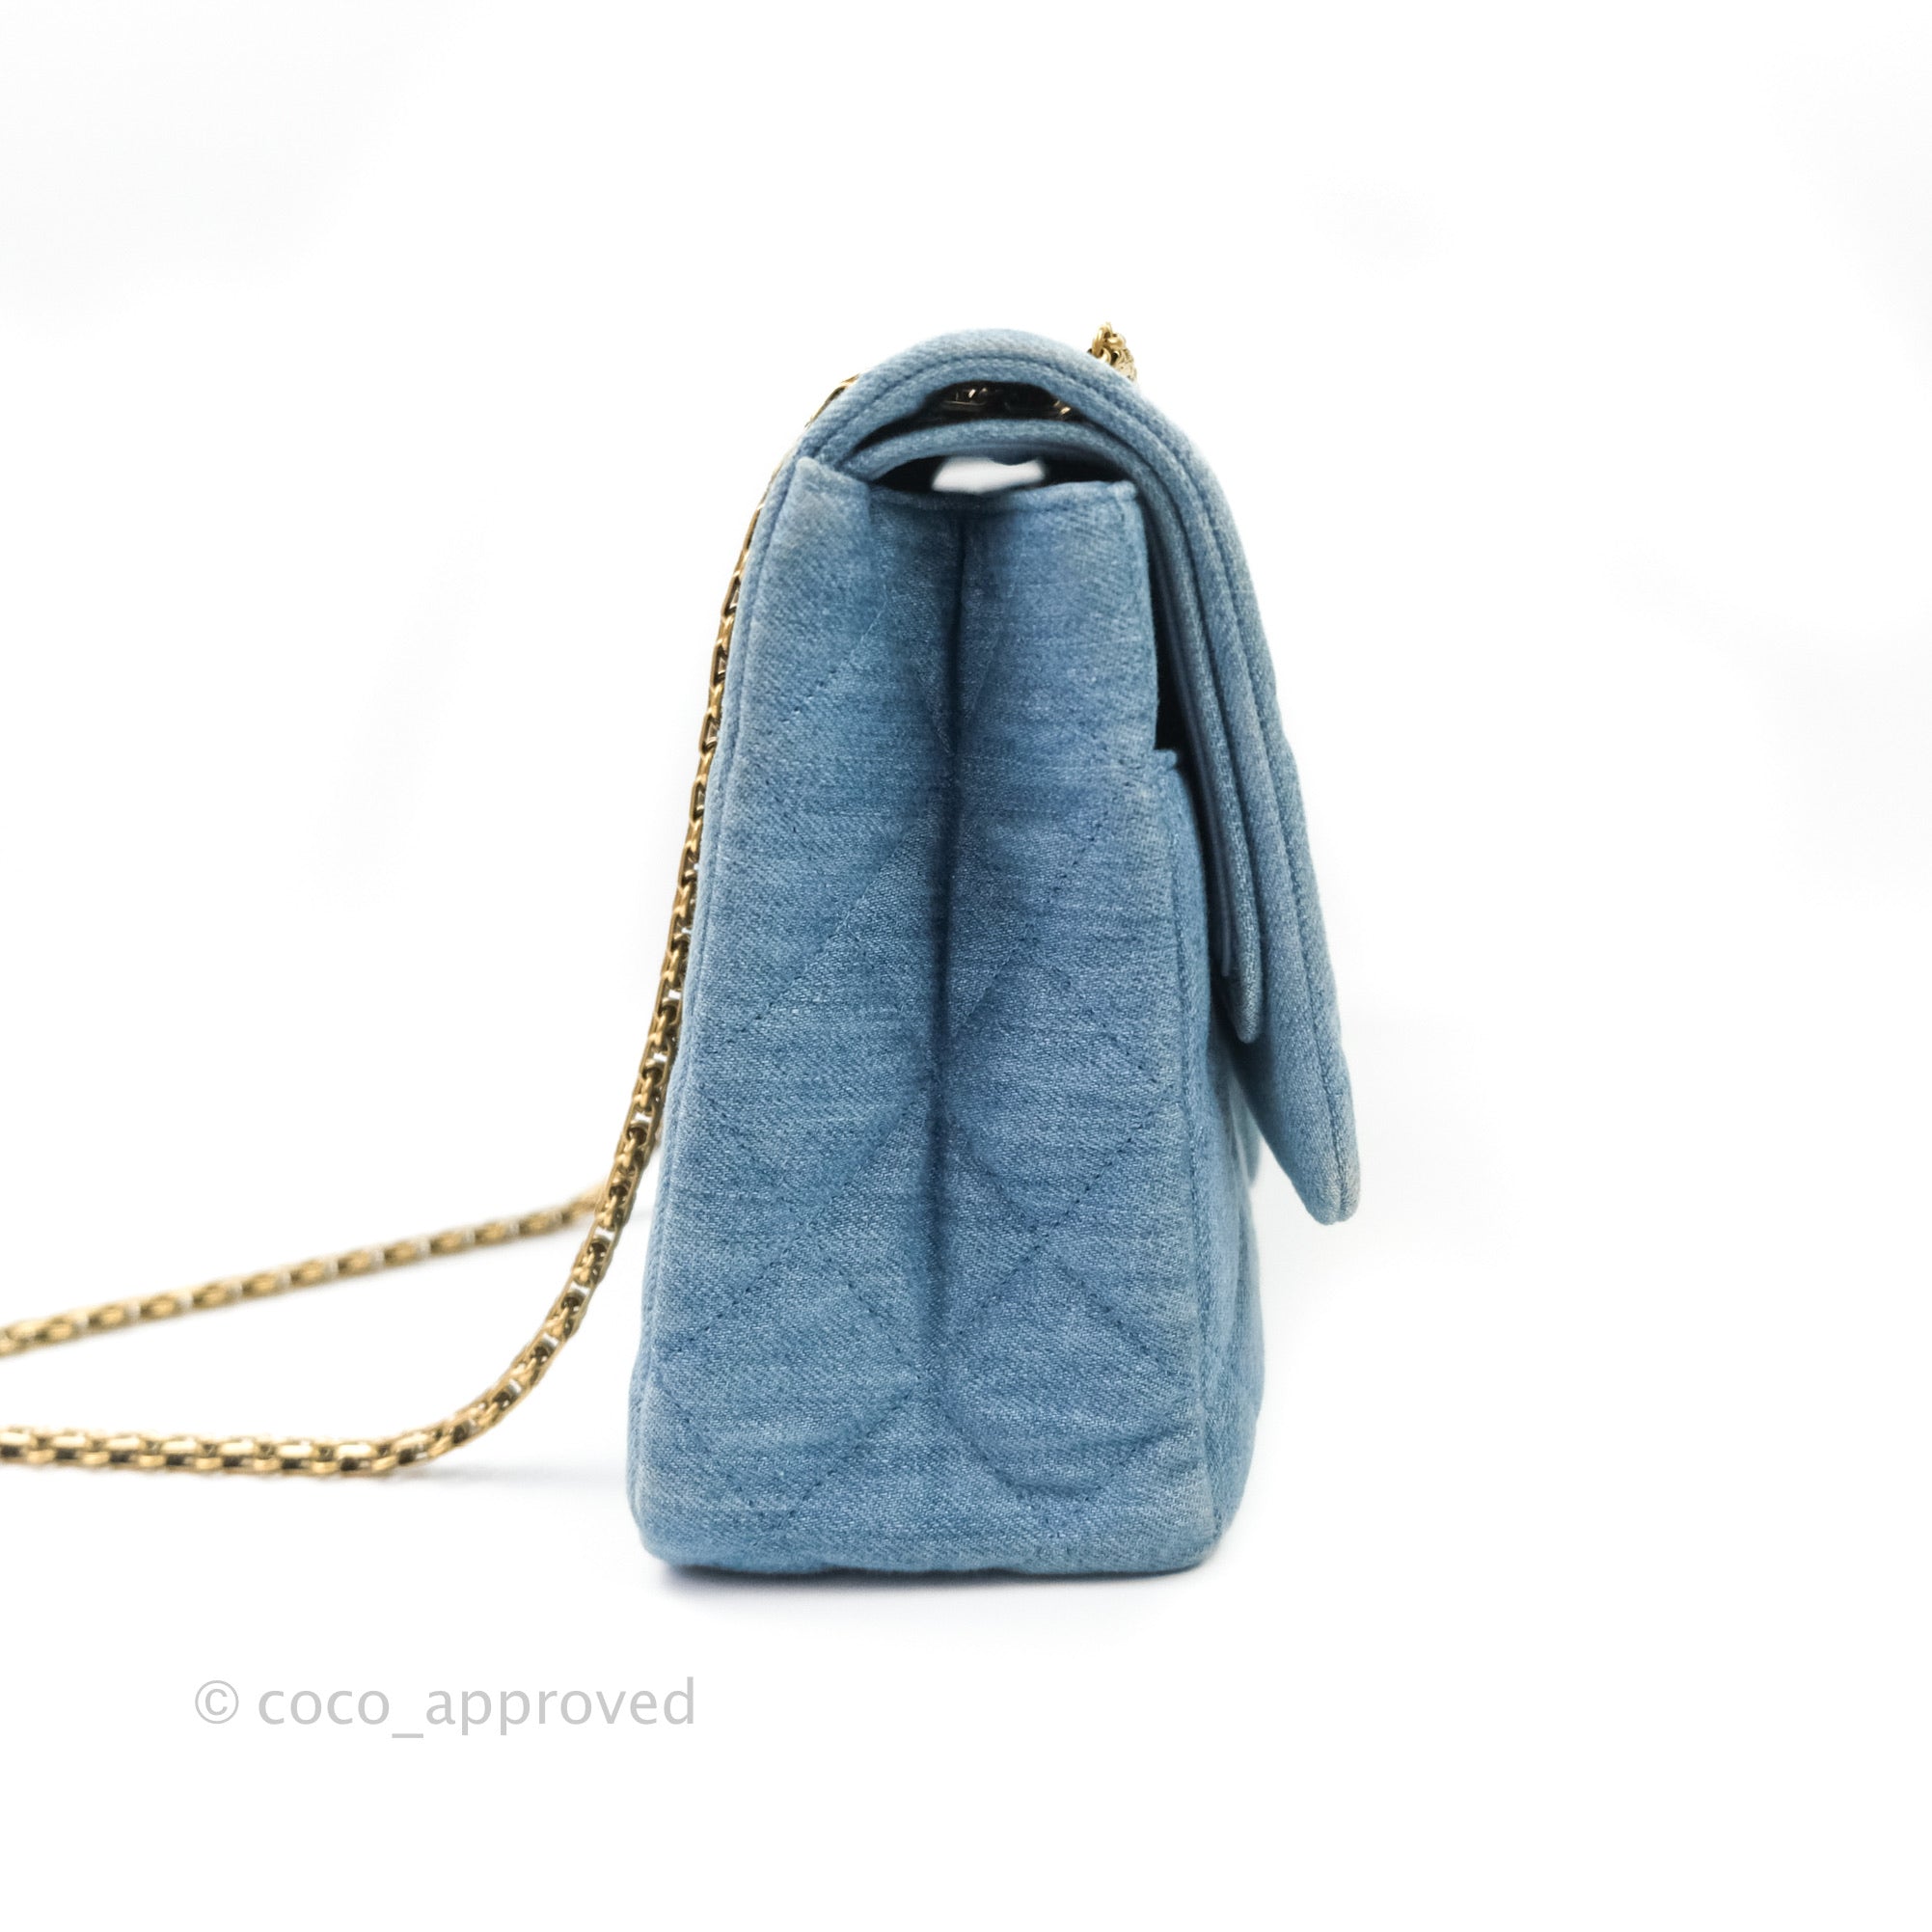 Chanel Quilted Accordion Reissue 2.55 Flap bag, blue patent leather, gold  hardware